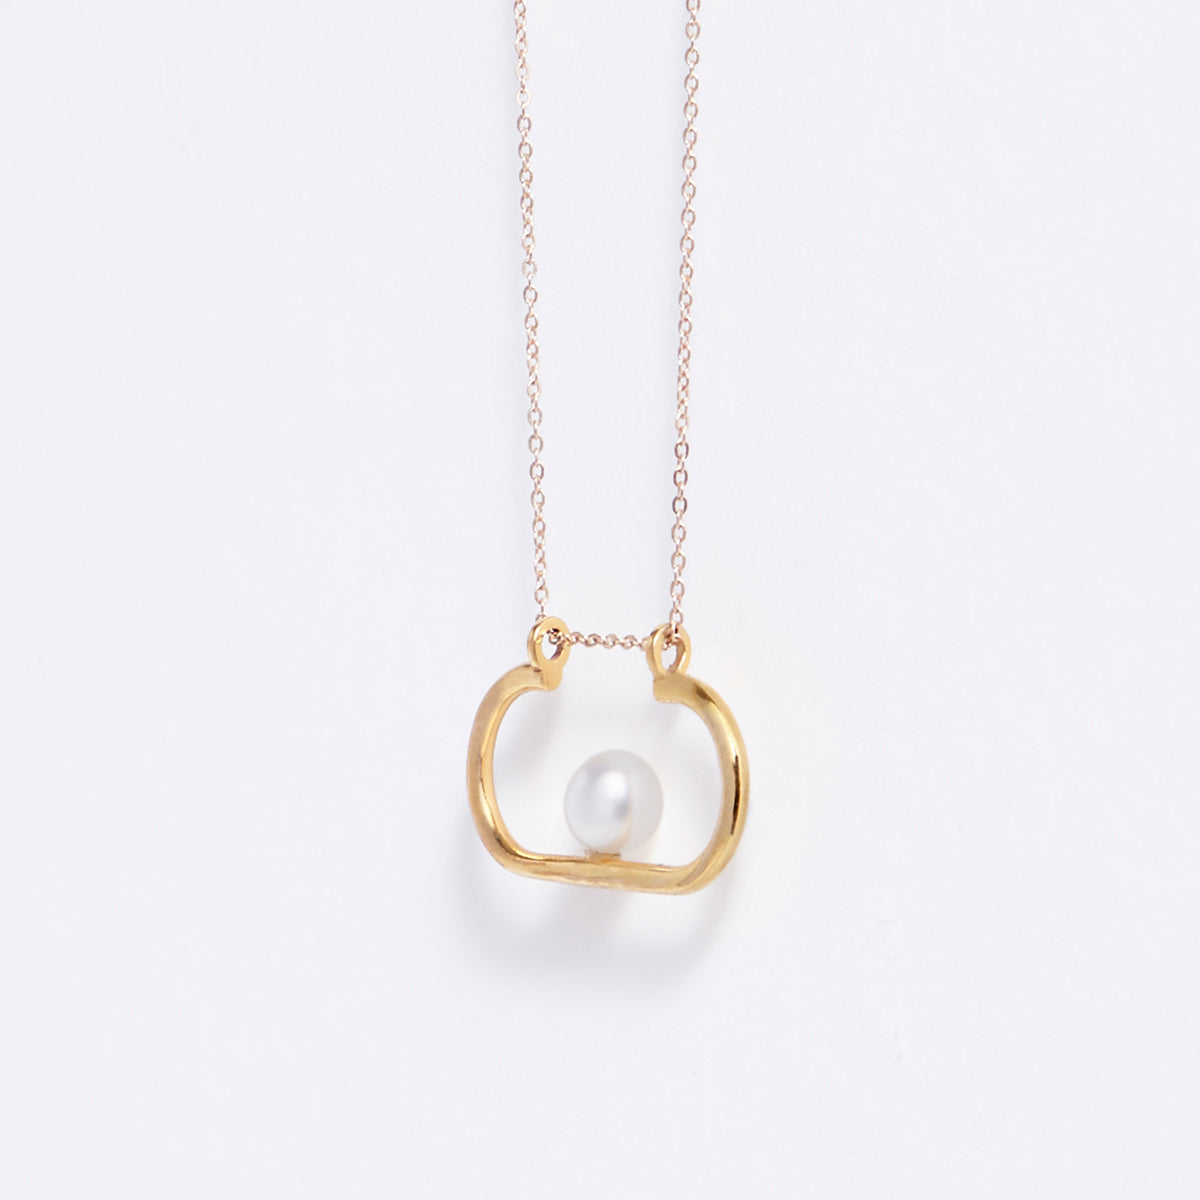 Metalepsis minimal modernist pearl Ito necklace 14k gold